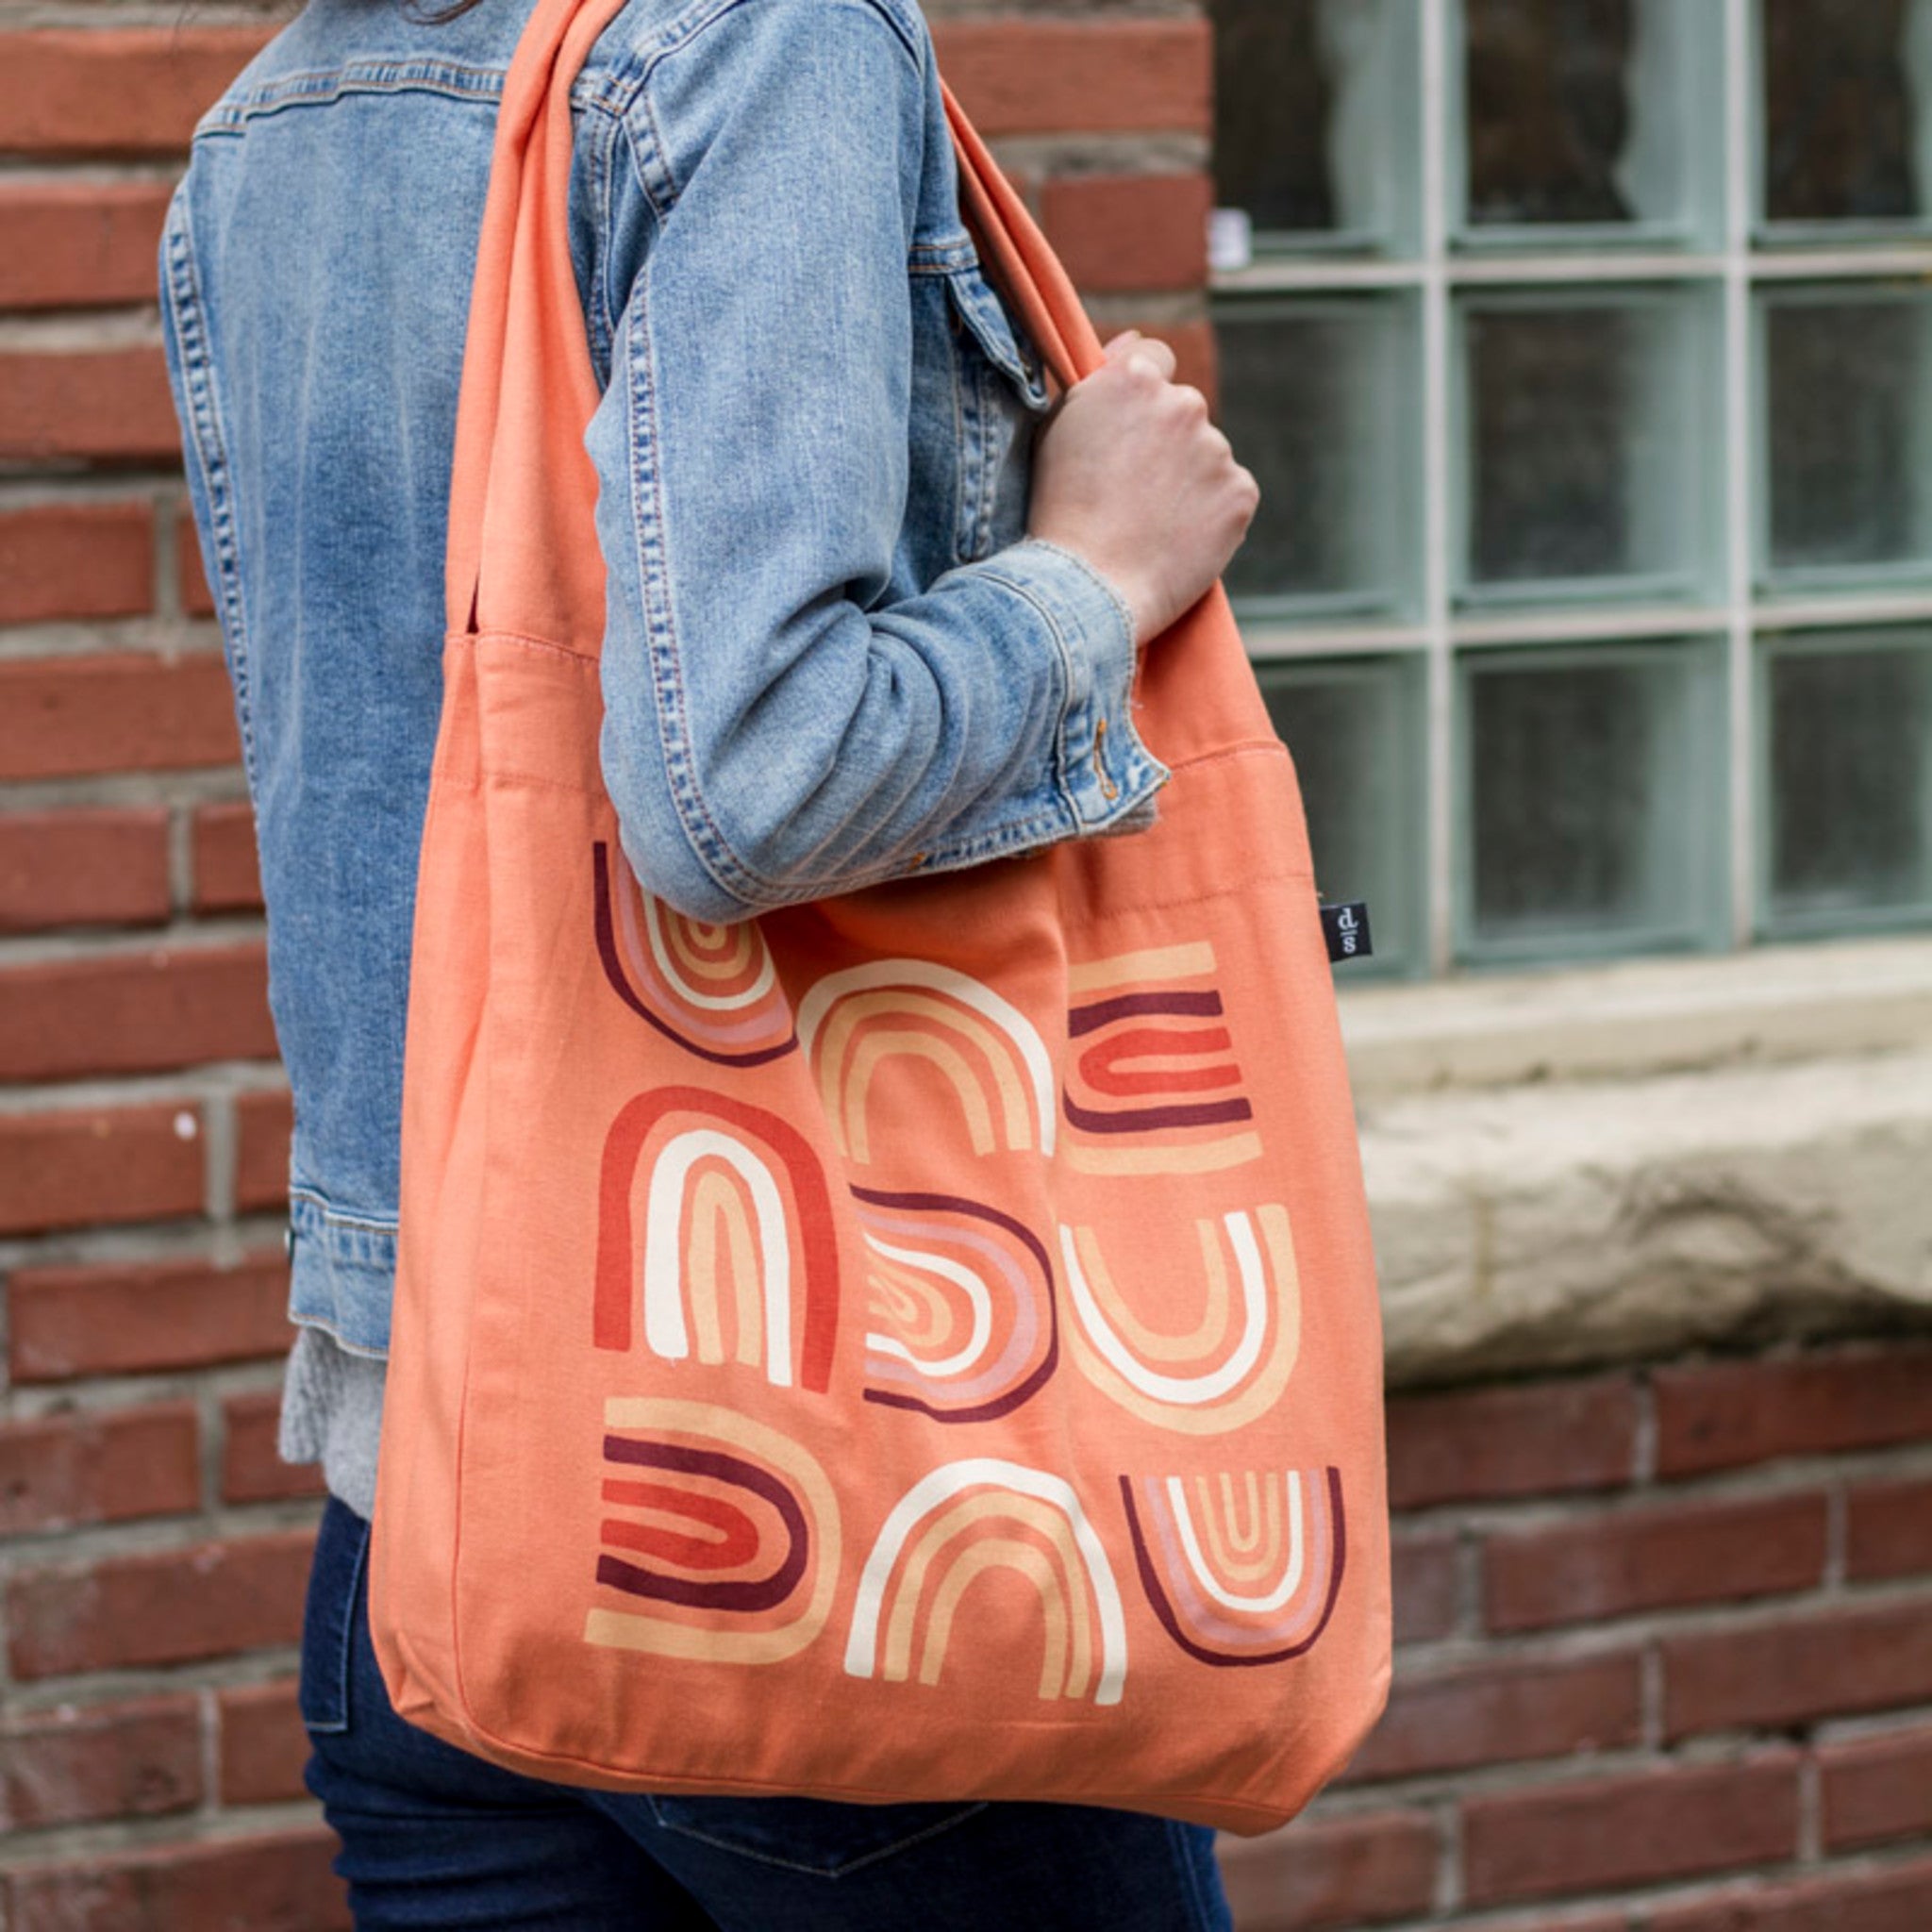 Solstice To and Fro Tote Bag